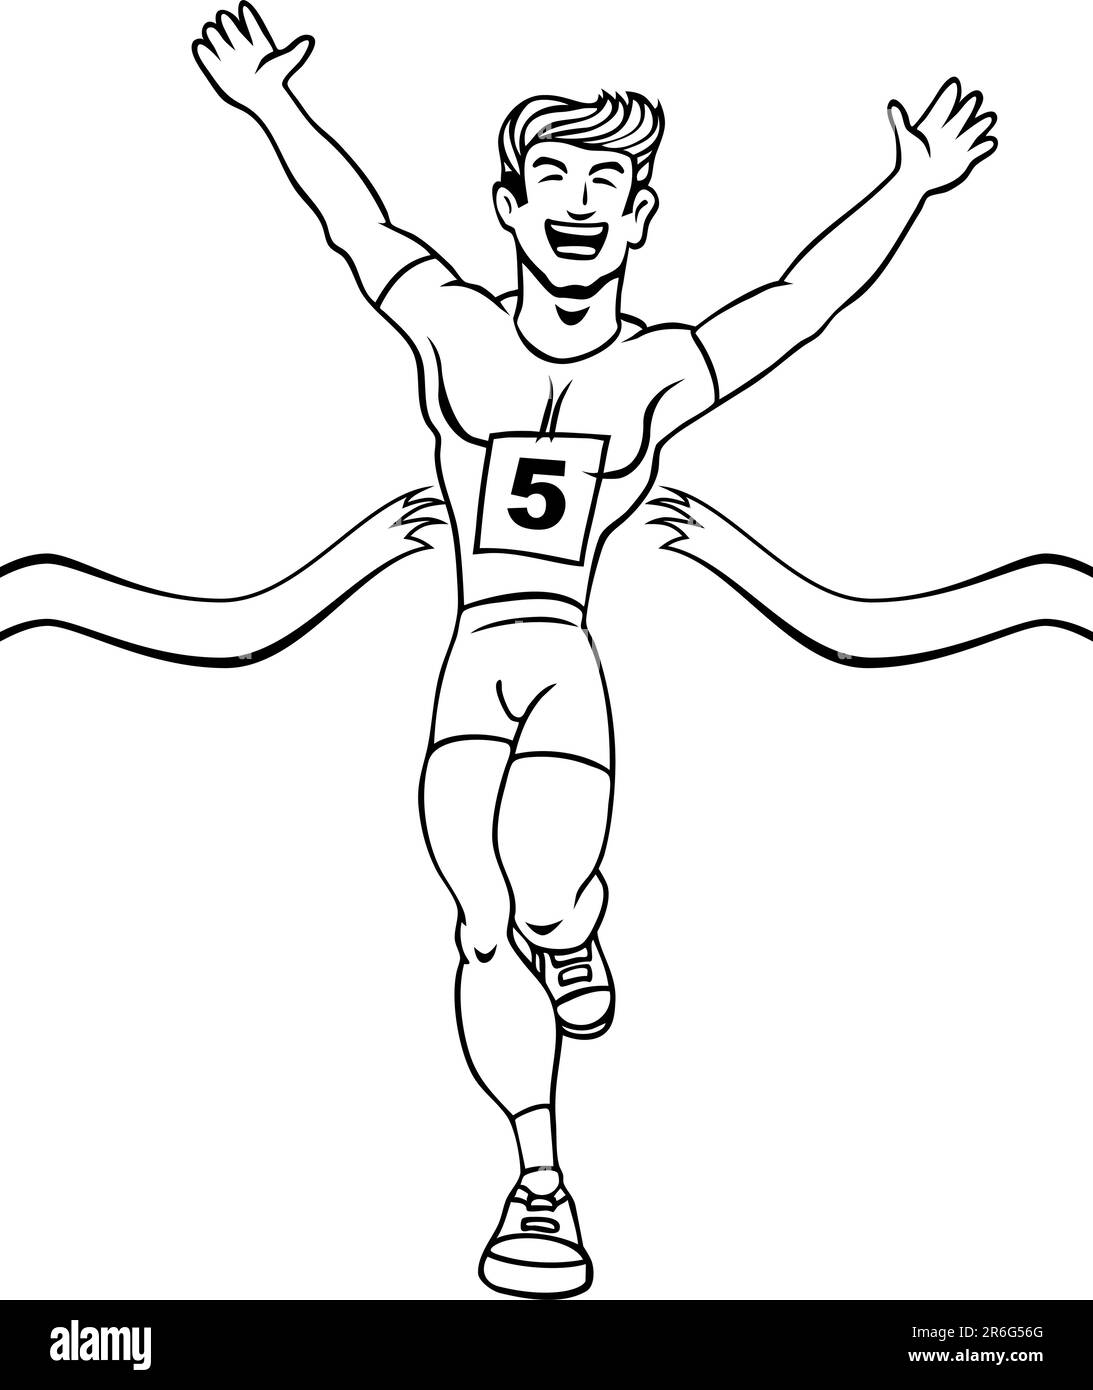 Cartoon of a man reaching the finish line in a running event. Stock Vector